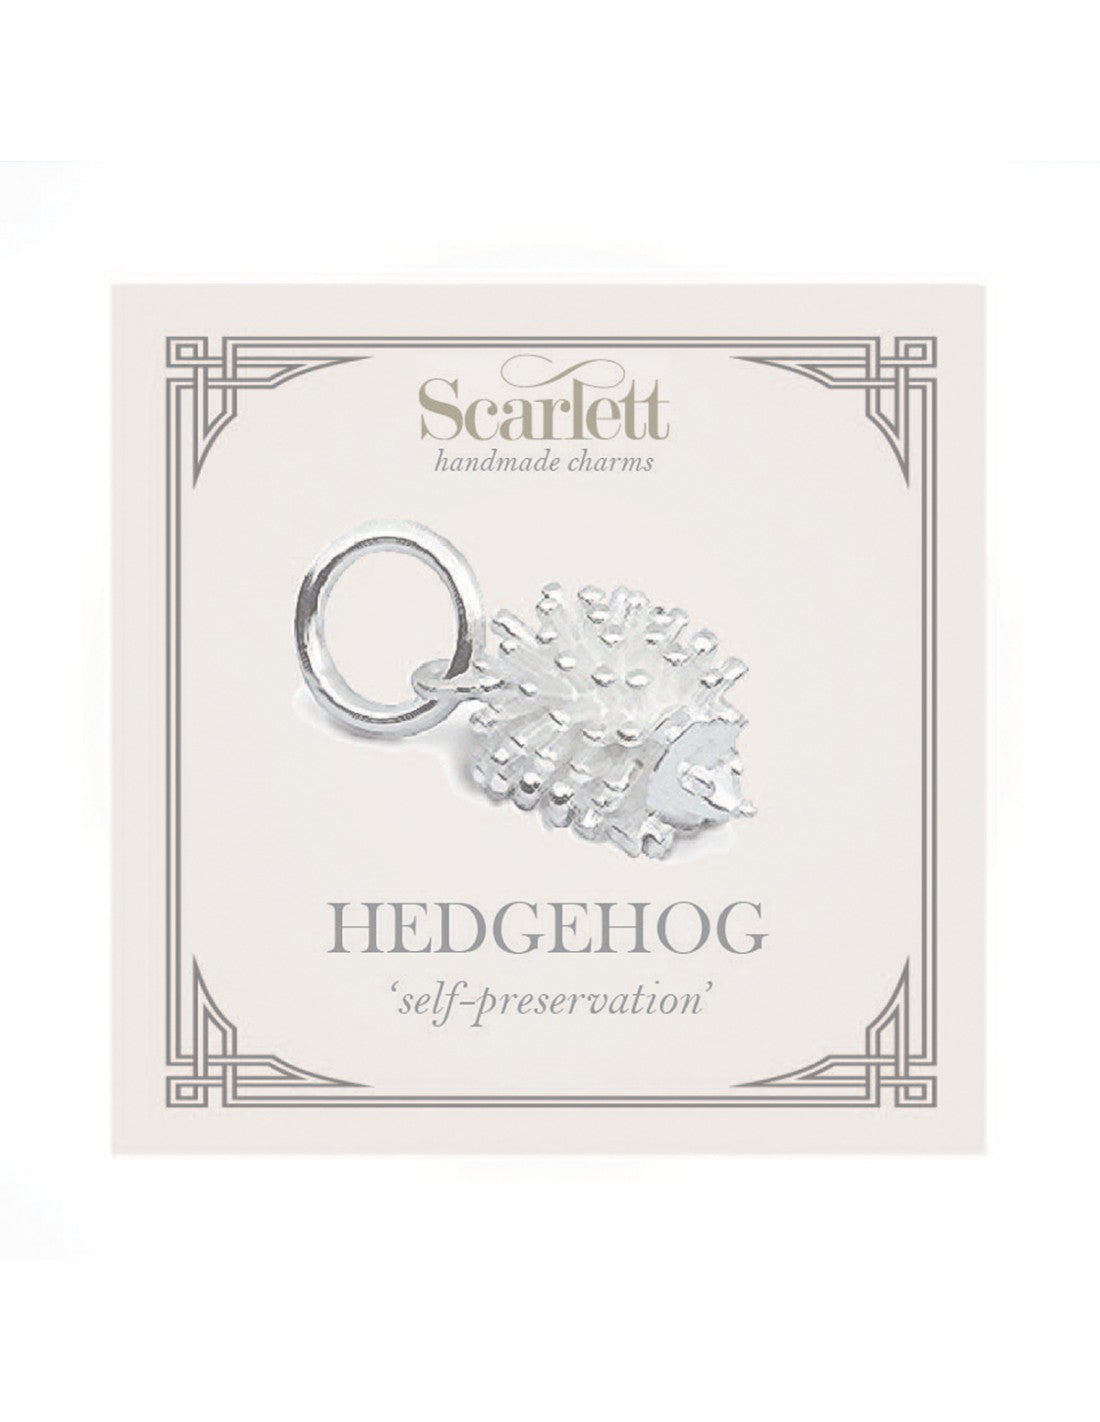 Hedgehog bracelet charm for traditional and fits pandora by Scarlett Jewellery